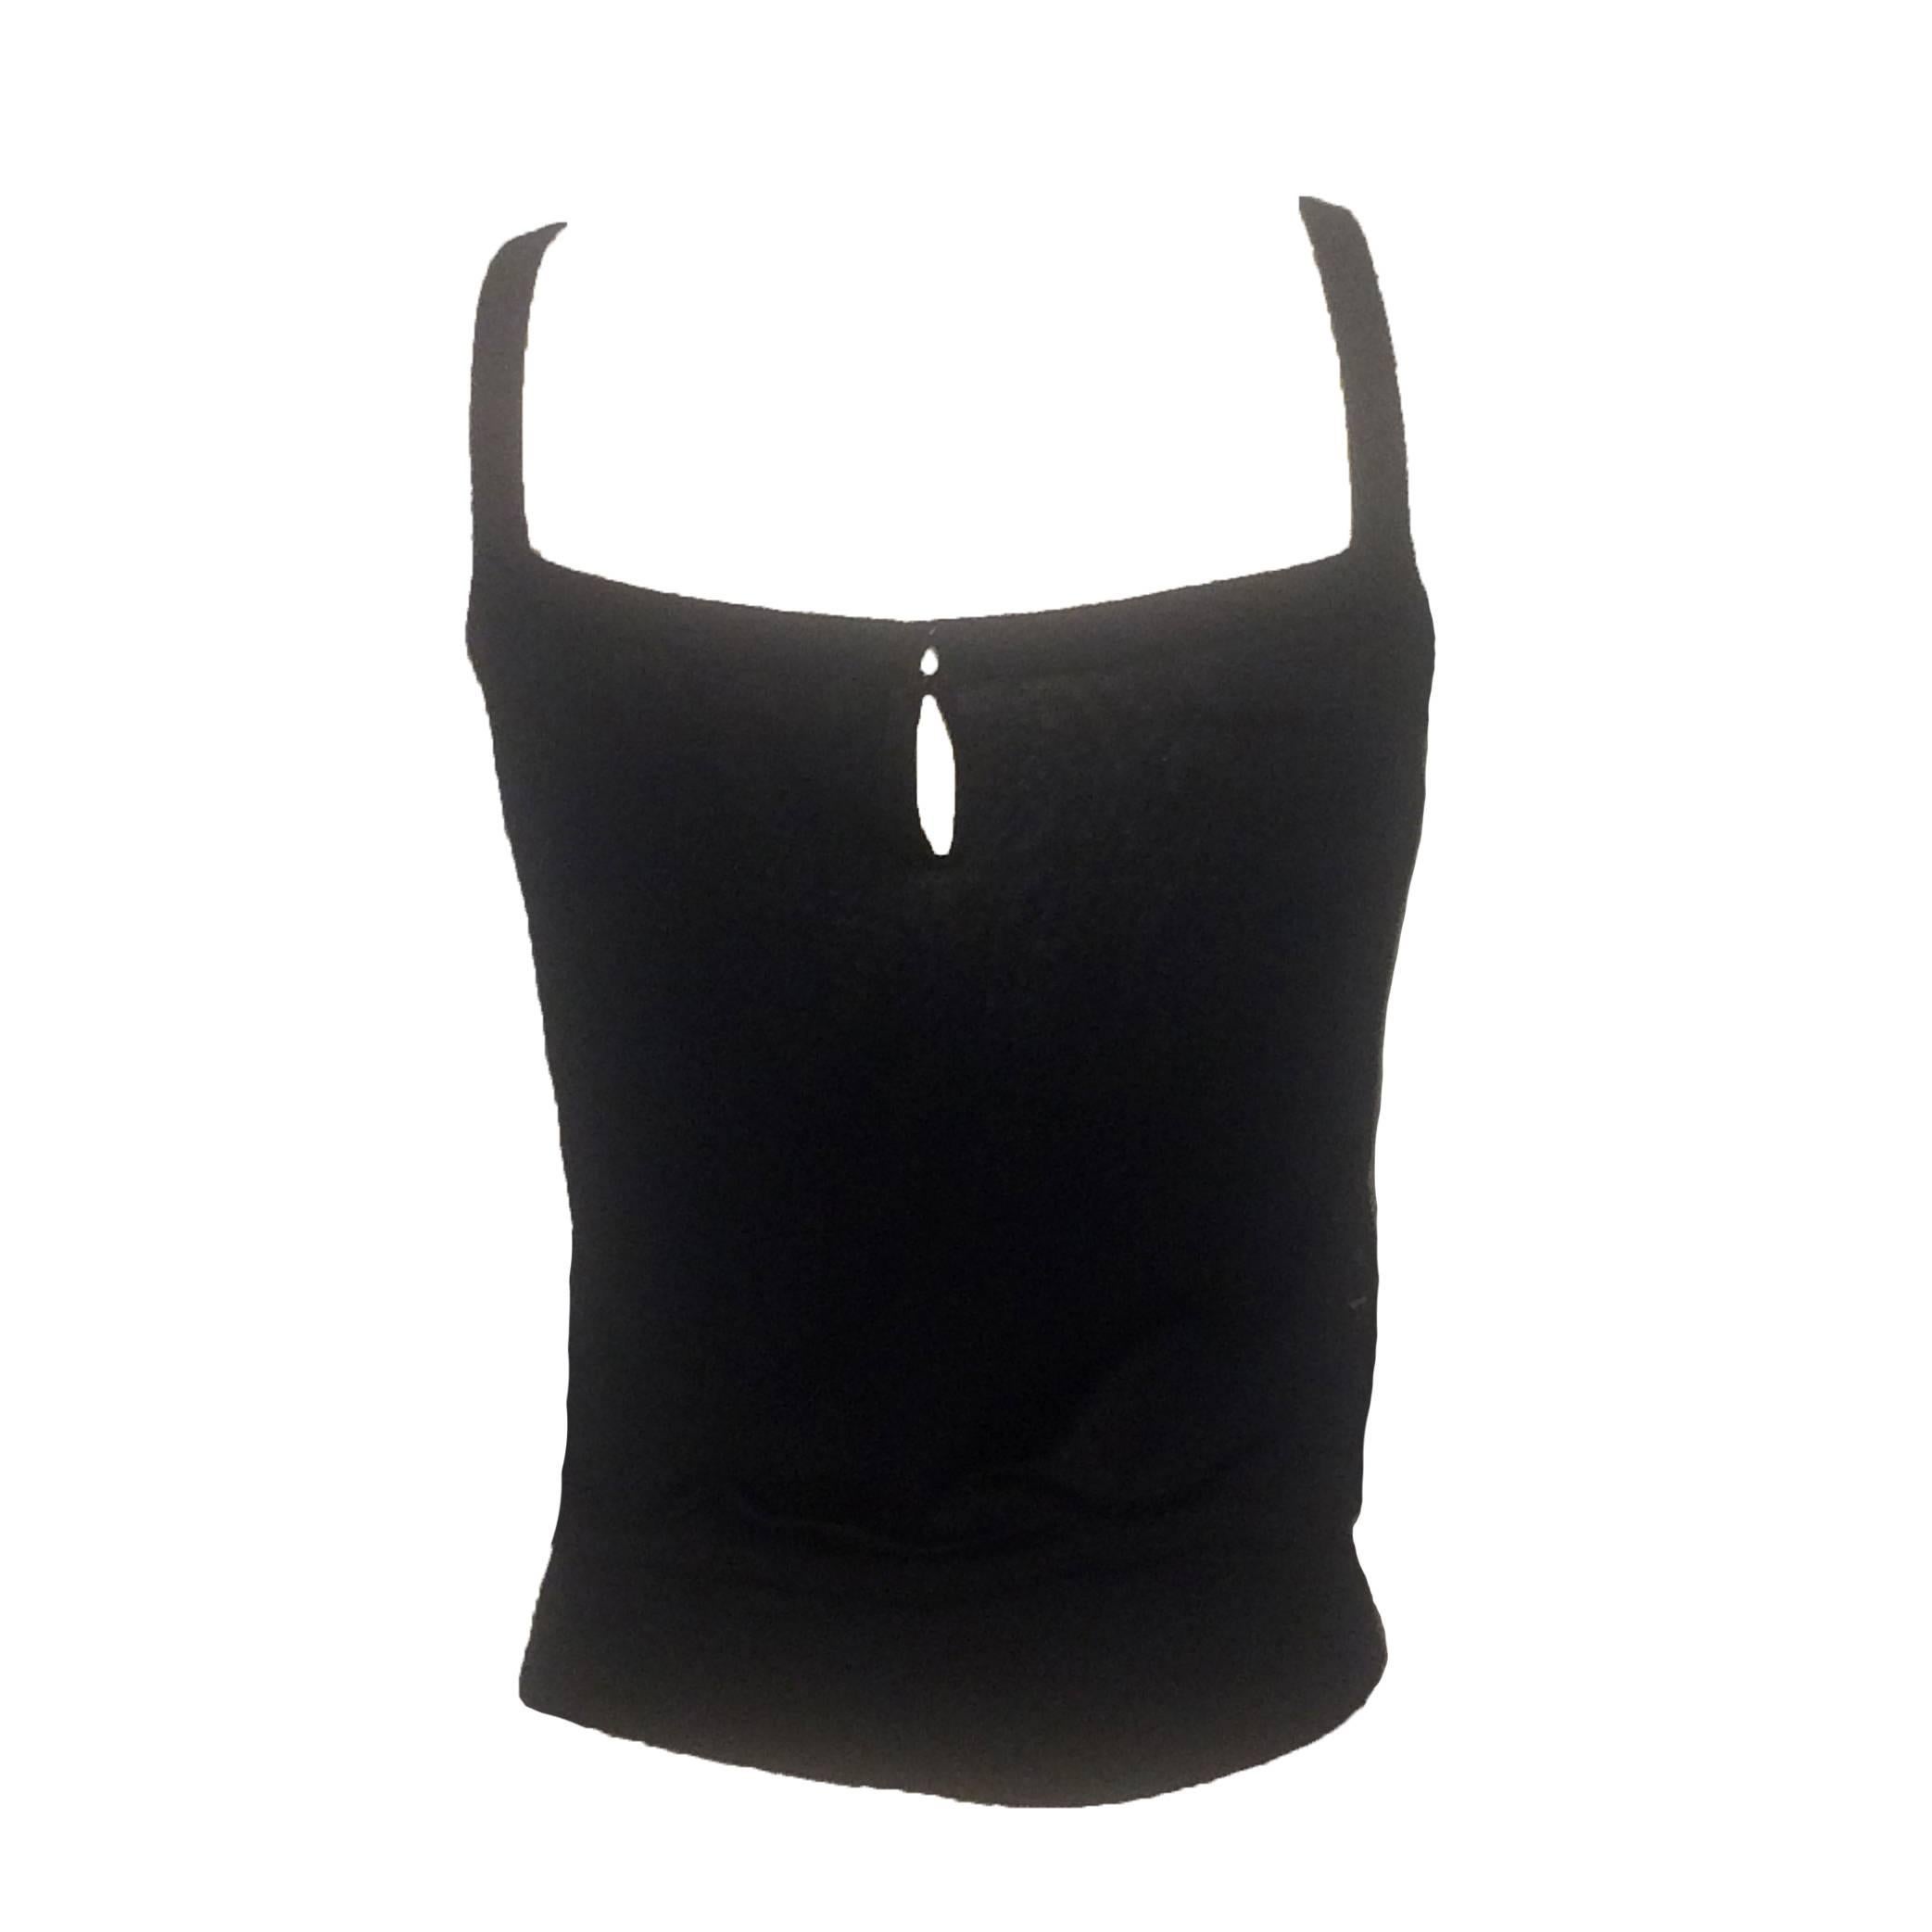 Dolce & Gabbana black sweater knit tank top with sheer lace front and keyhole at back with two branded buttons and leather-look ribbon trim at top front.

No content tag, feels like cotton blend.

Made in Italy.

Estimated size IT 40, US 4.